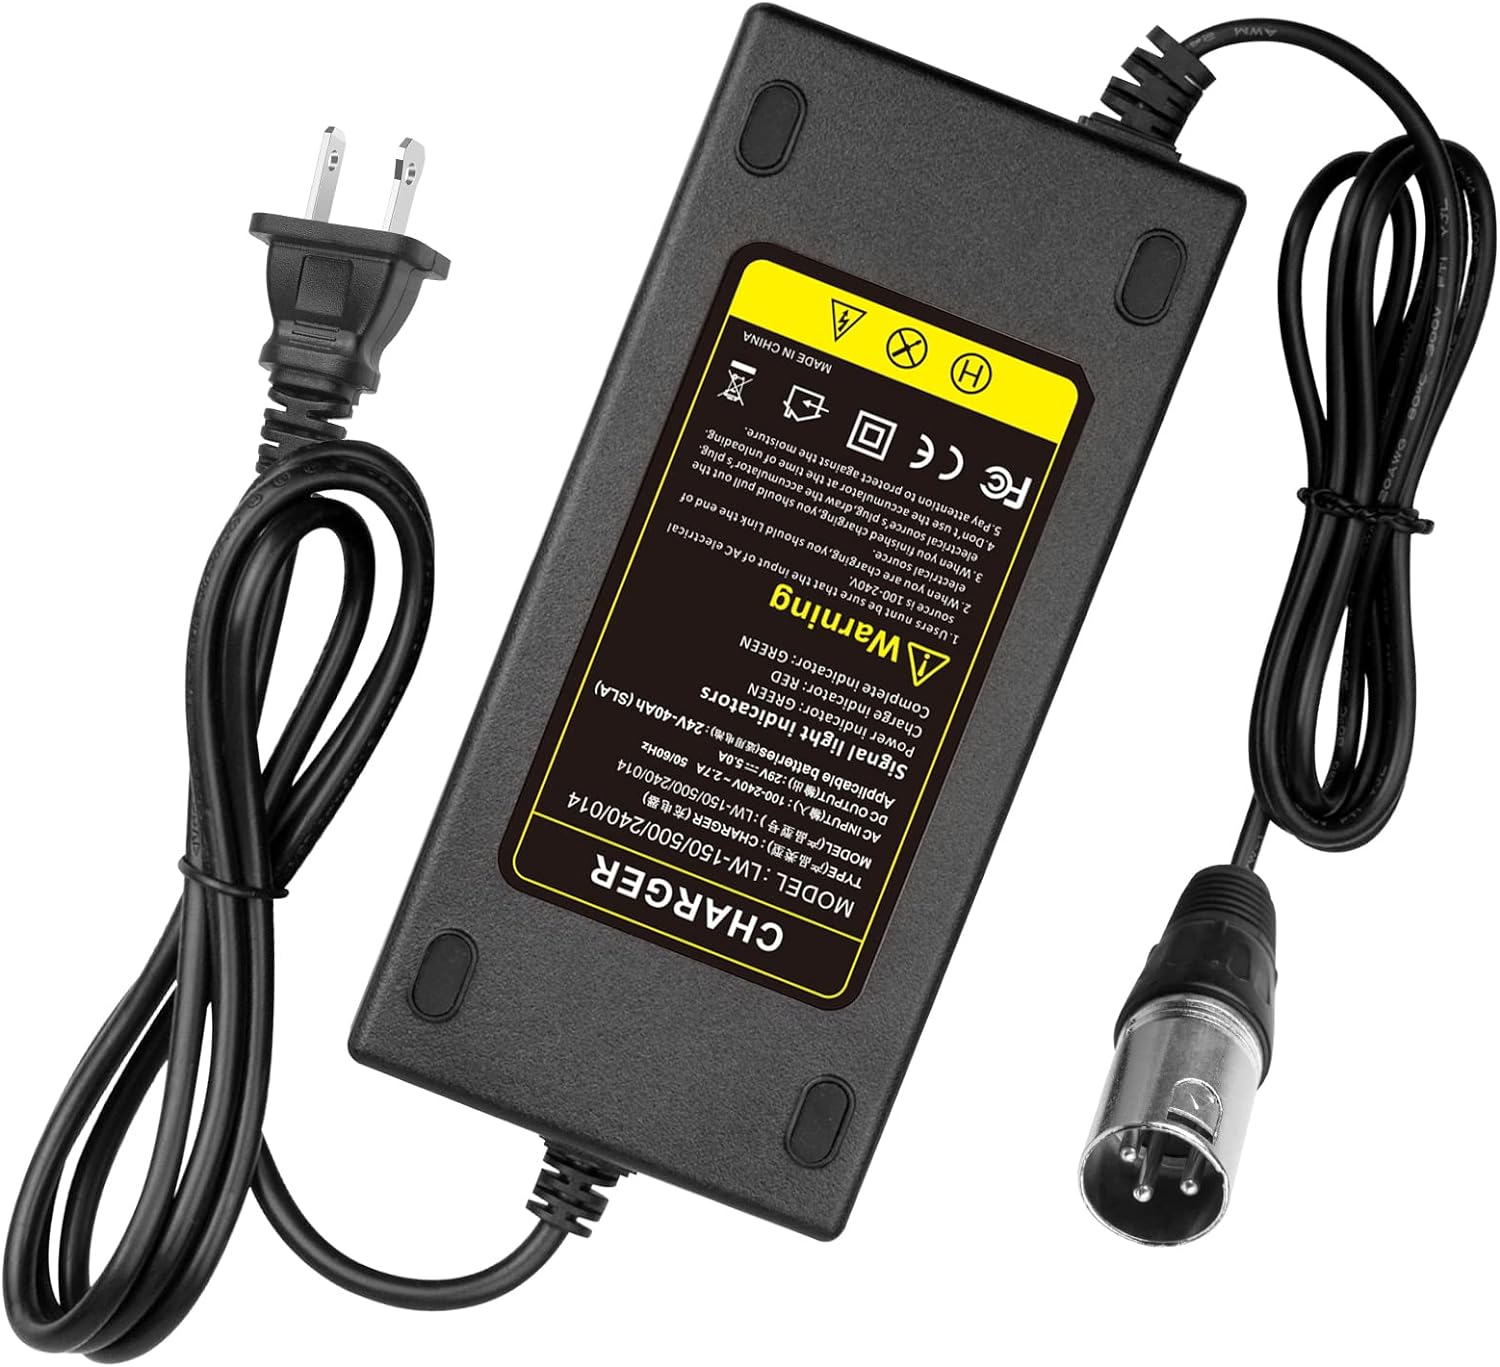 24V 5A 3-Pin Male XLR Connector Battery Charger for Lakematic, Pride Mobility, Jazzy Power Chair, Drive Medical, Golden